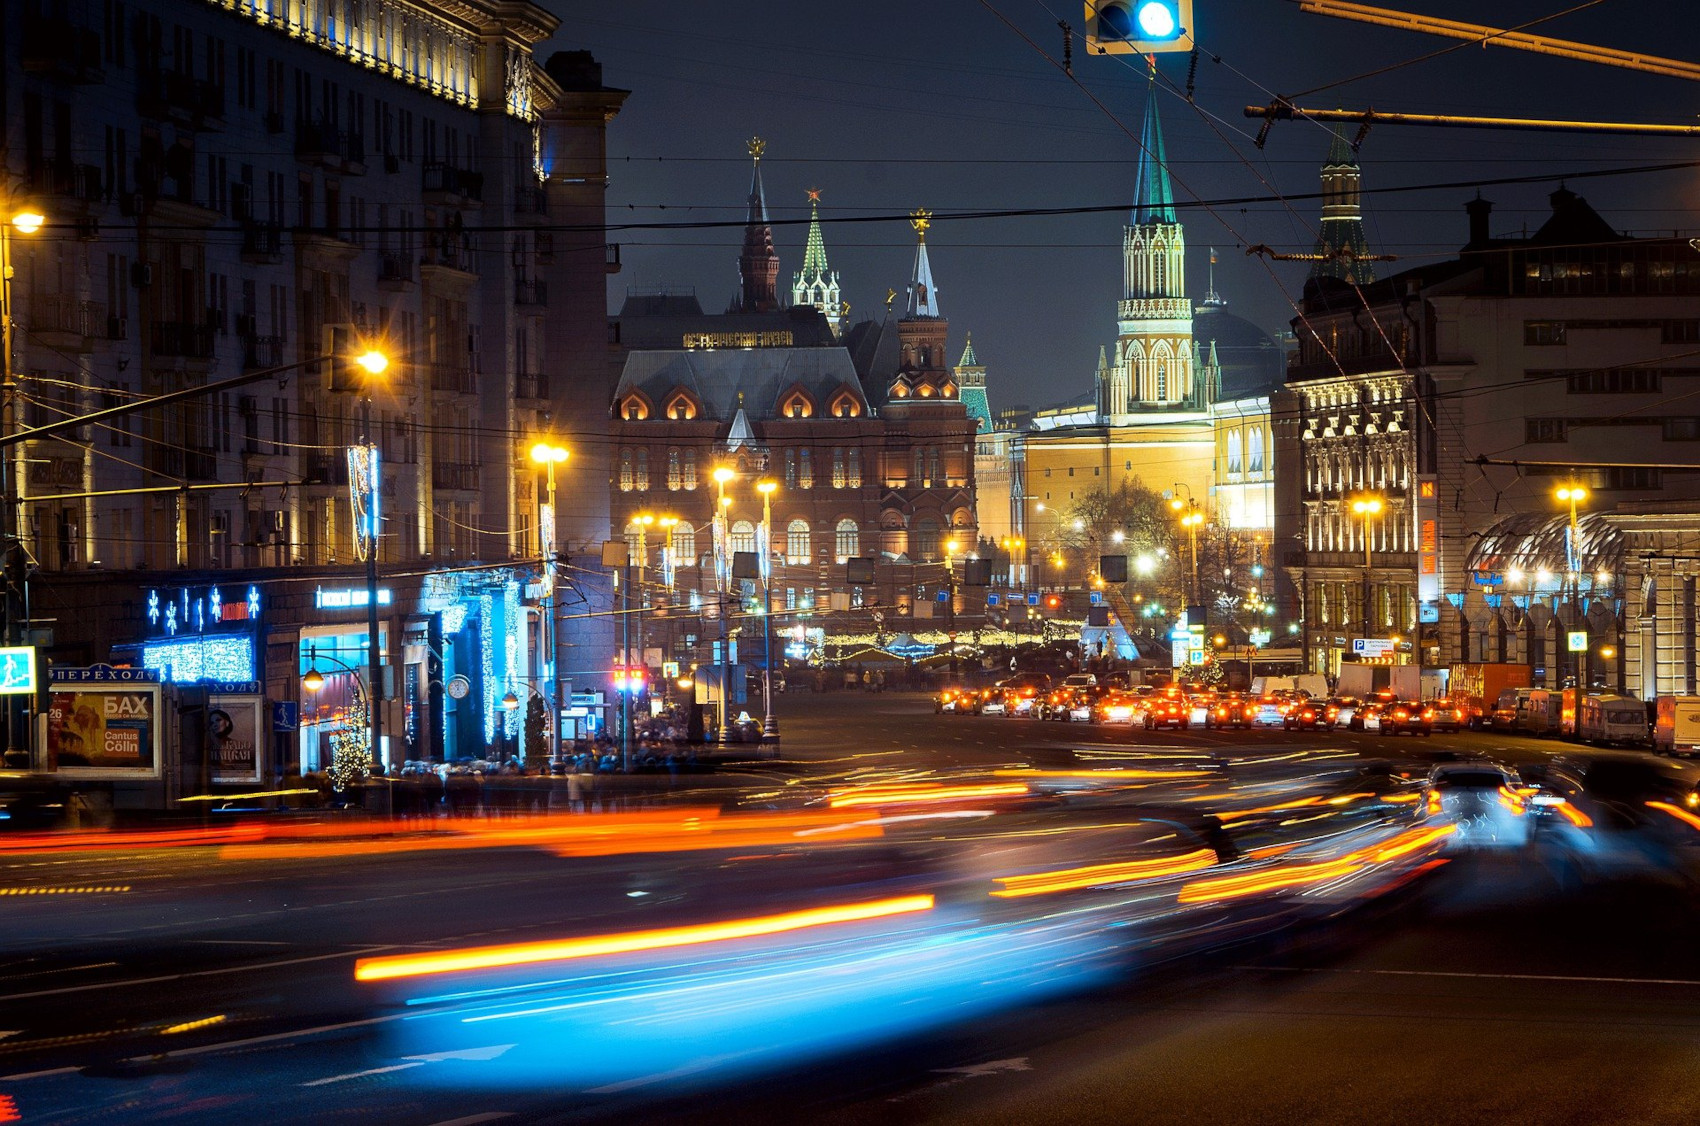 Moscow at Night - Image by serbuxarev